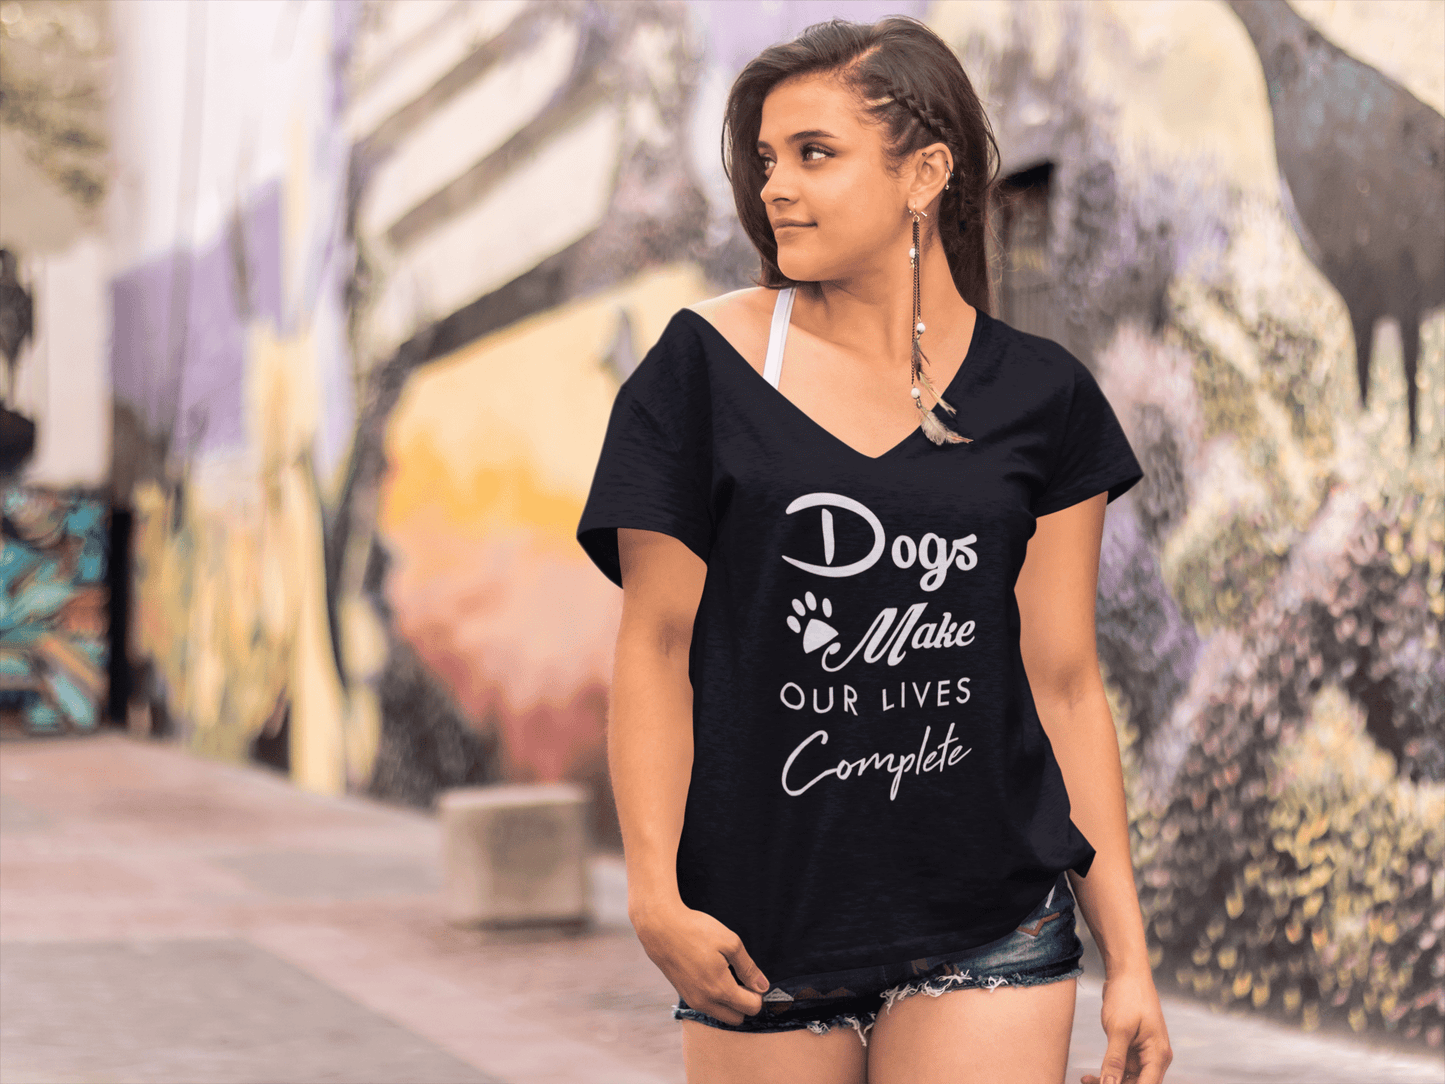 ULTRABASIC Women's T-Shirt Dogs Make Our Lives Complete - Funny Short Sleeve Tee Shirt Tops